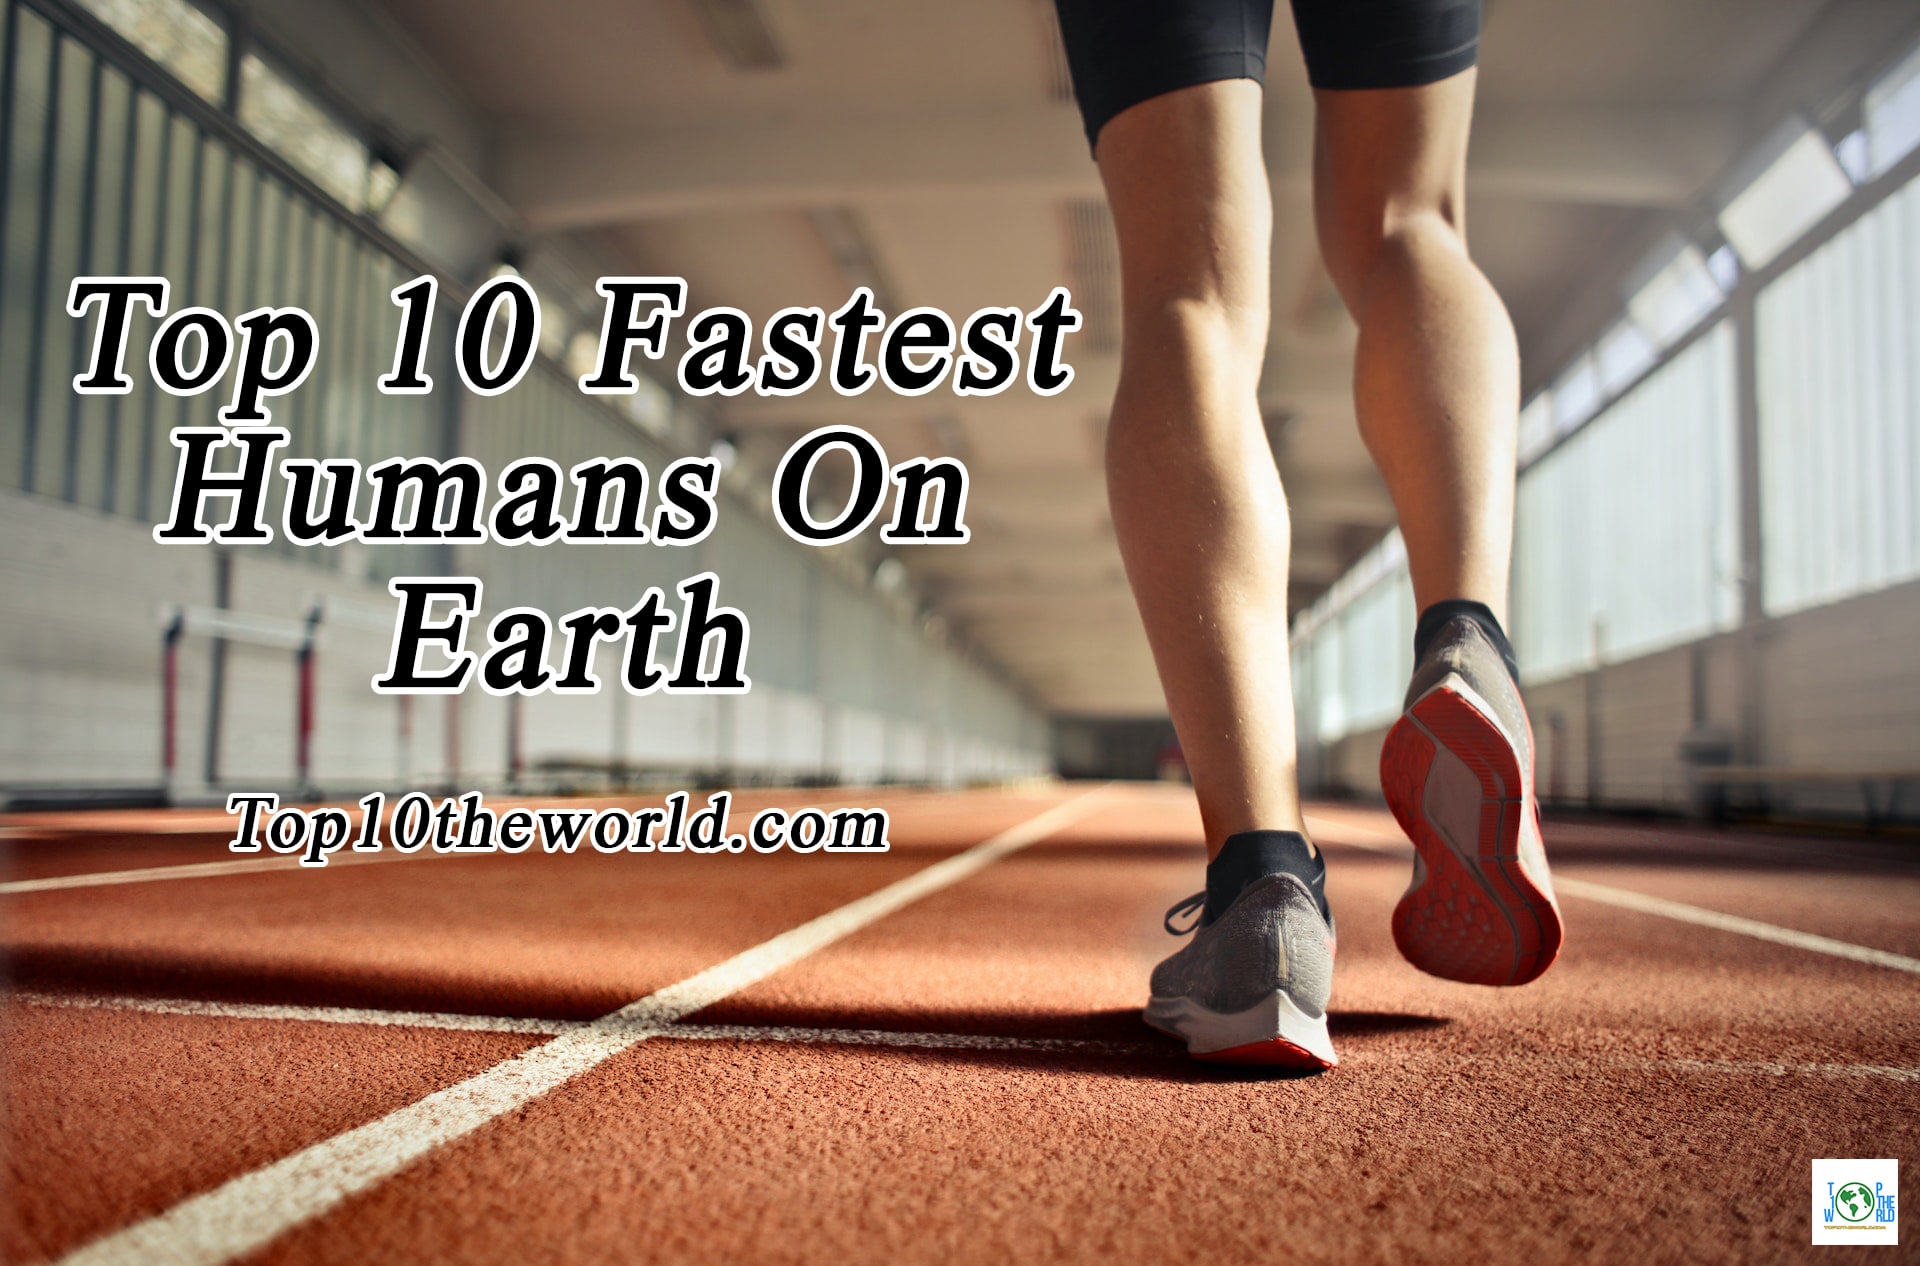 Top 10 Fastest Humans On Earth